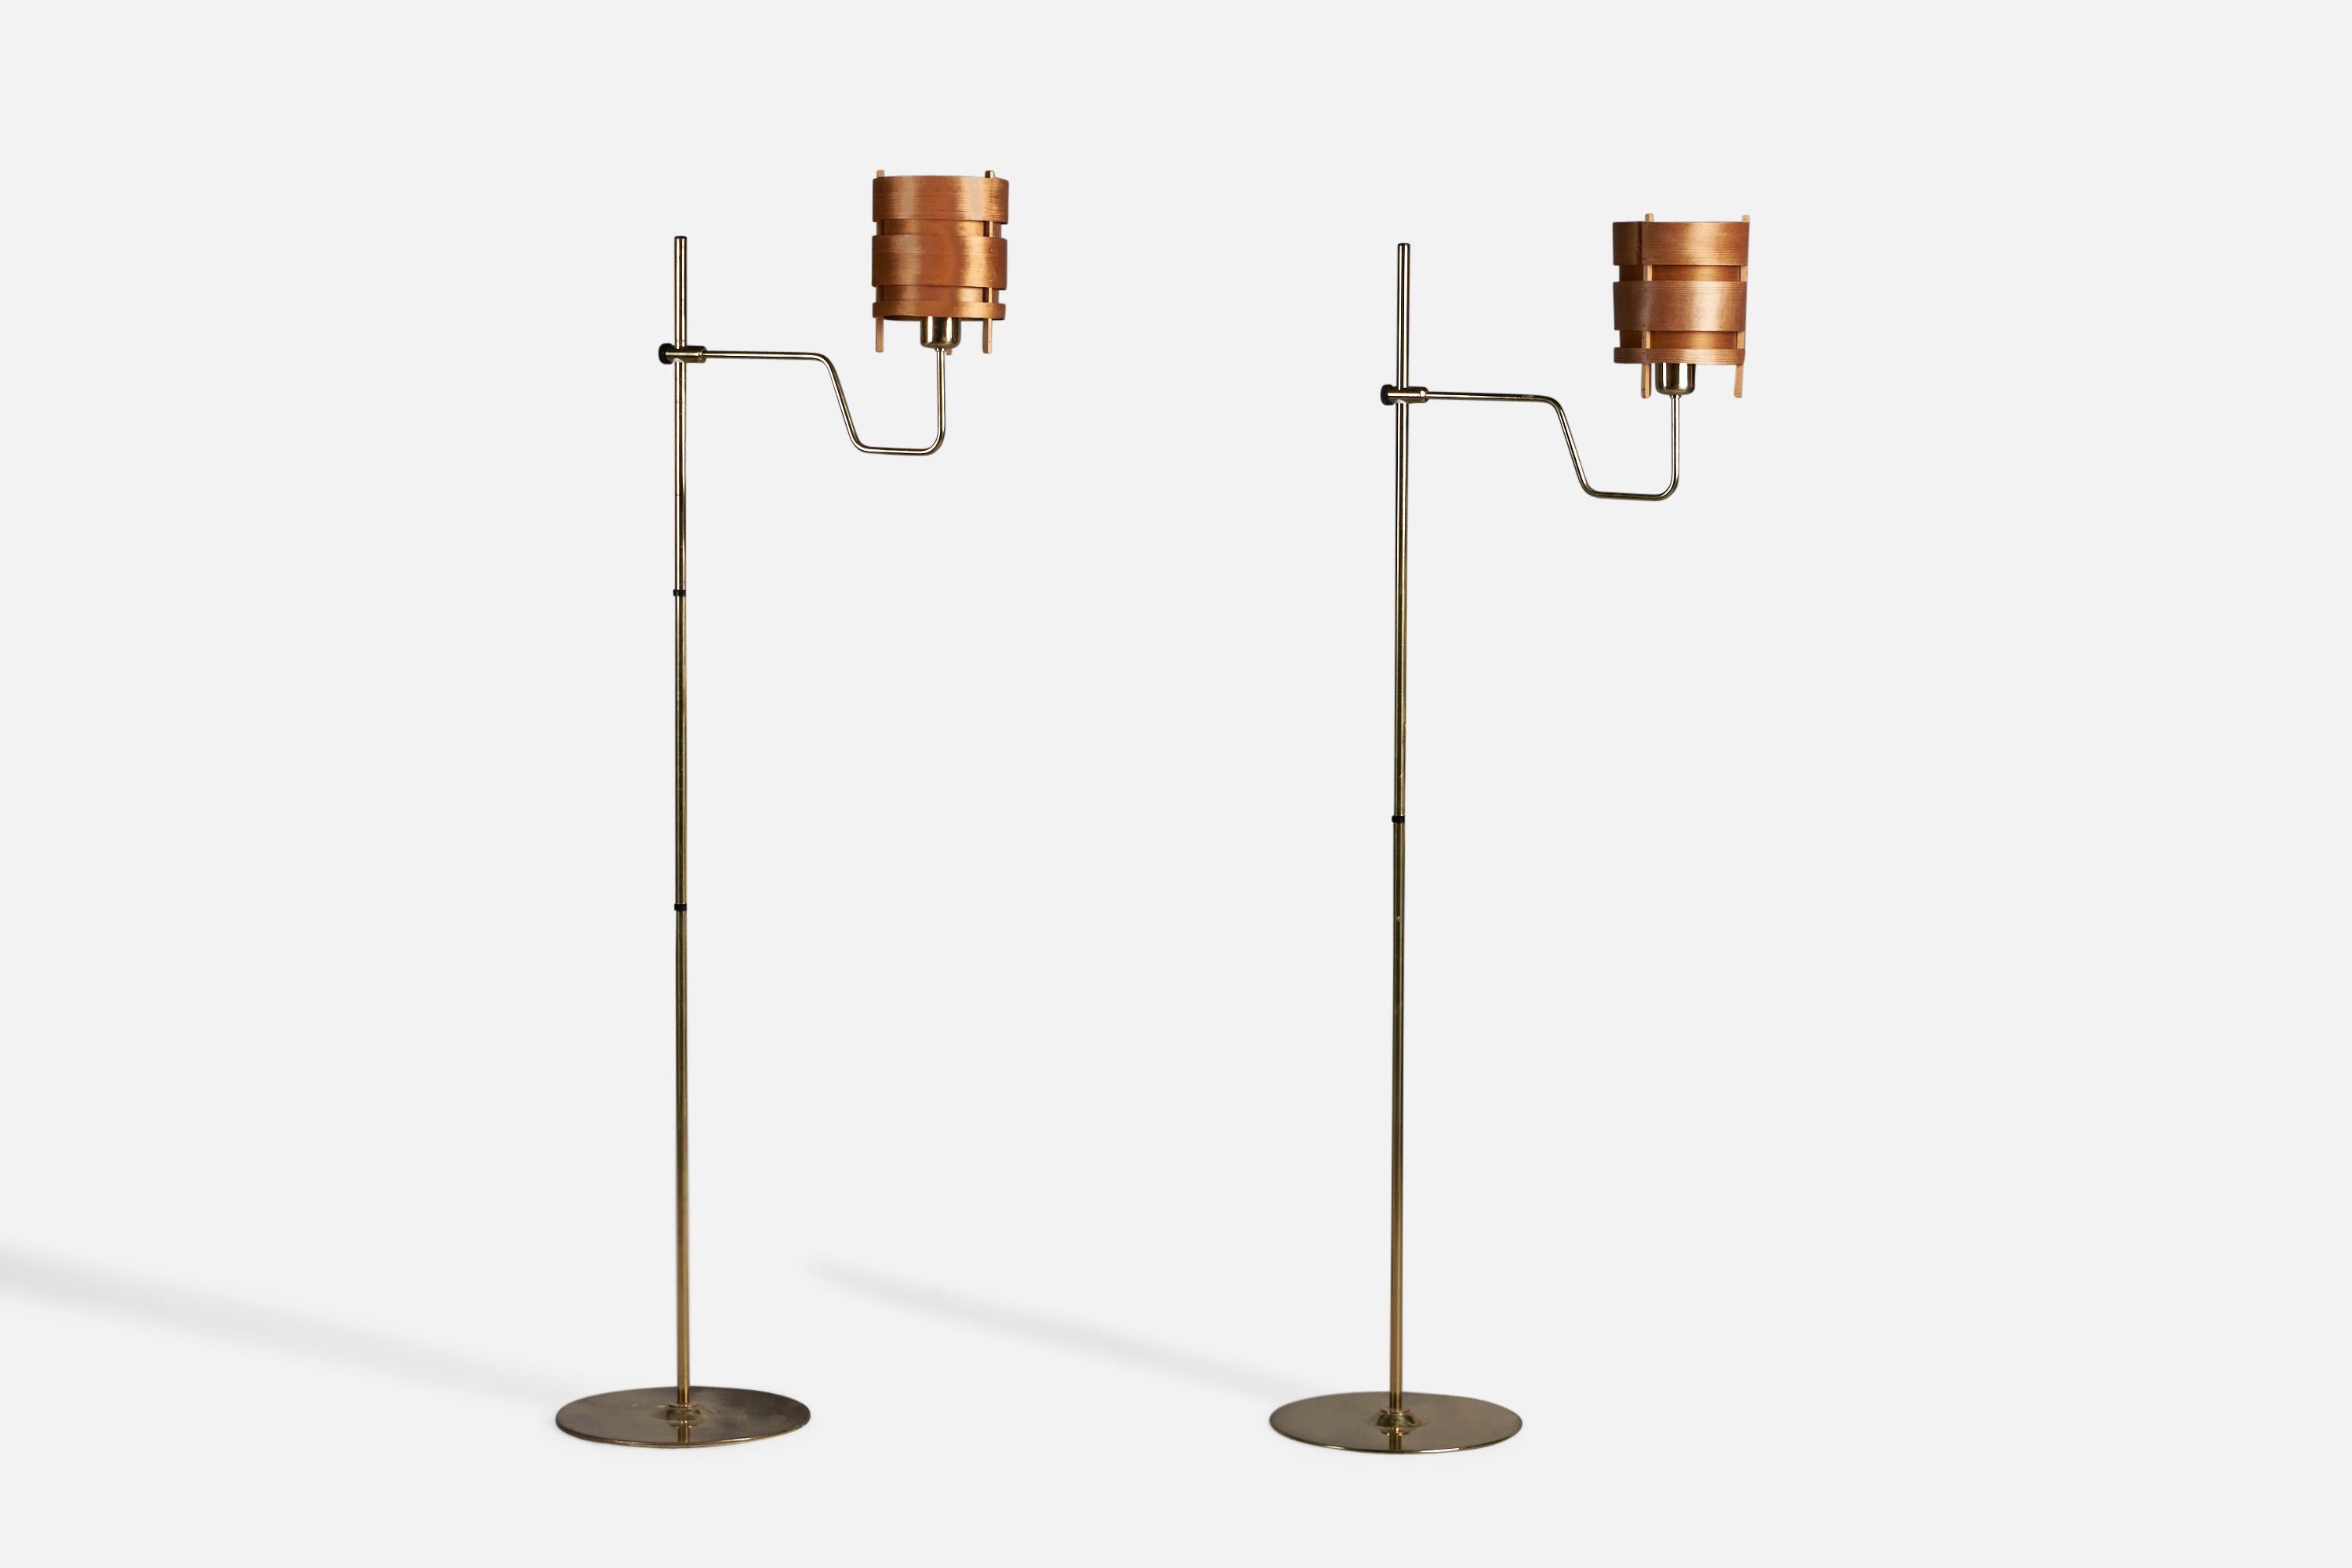 A pair of brass, pine and moulded pine veneer floor lamps, designed and produced by Hans Agne Jakobsson, Markaryd, Sweden, c. 1970s.

Overall Dimensions (inches): 62.5